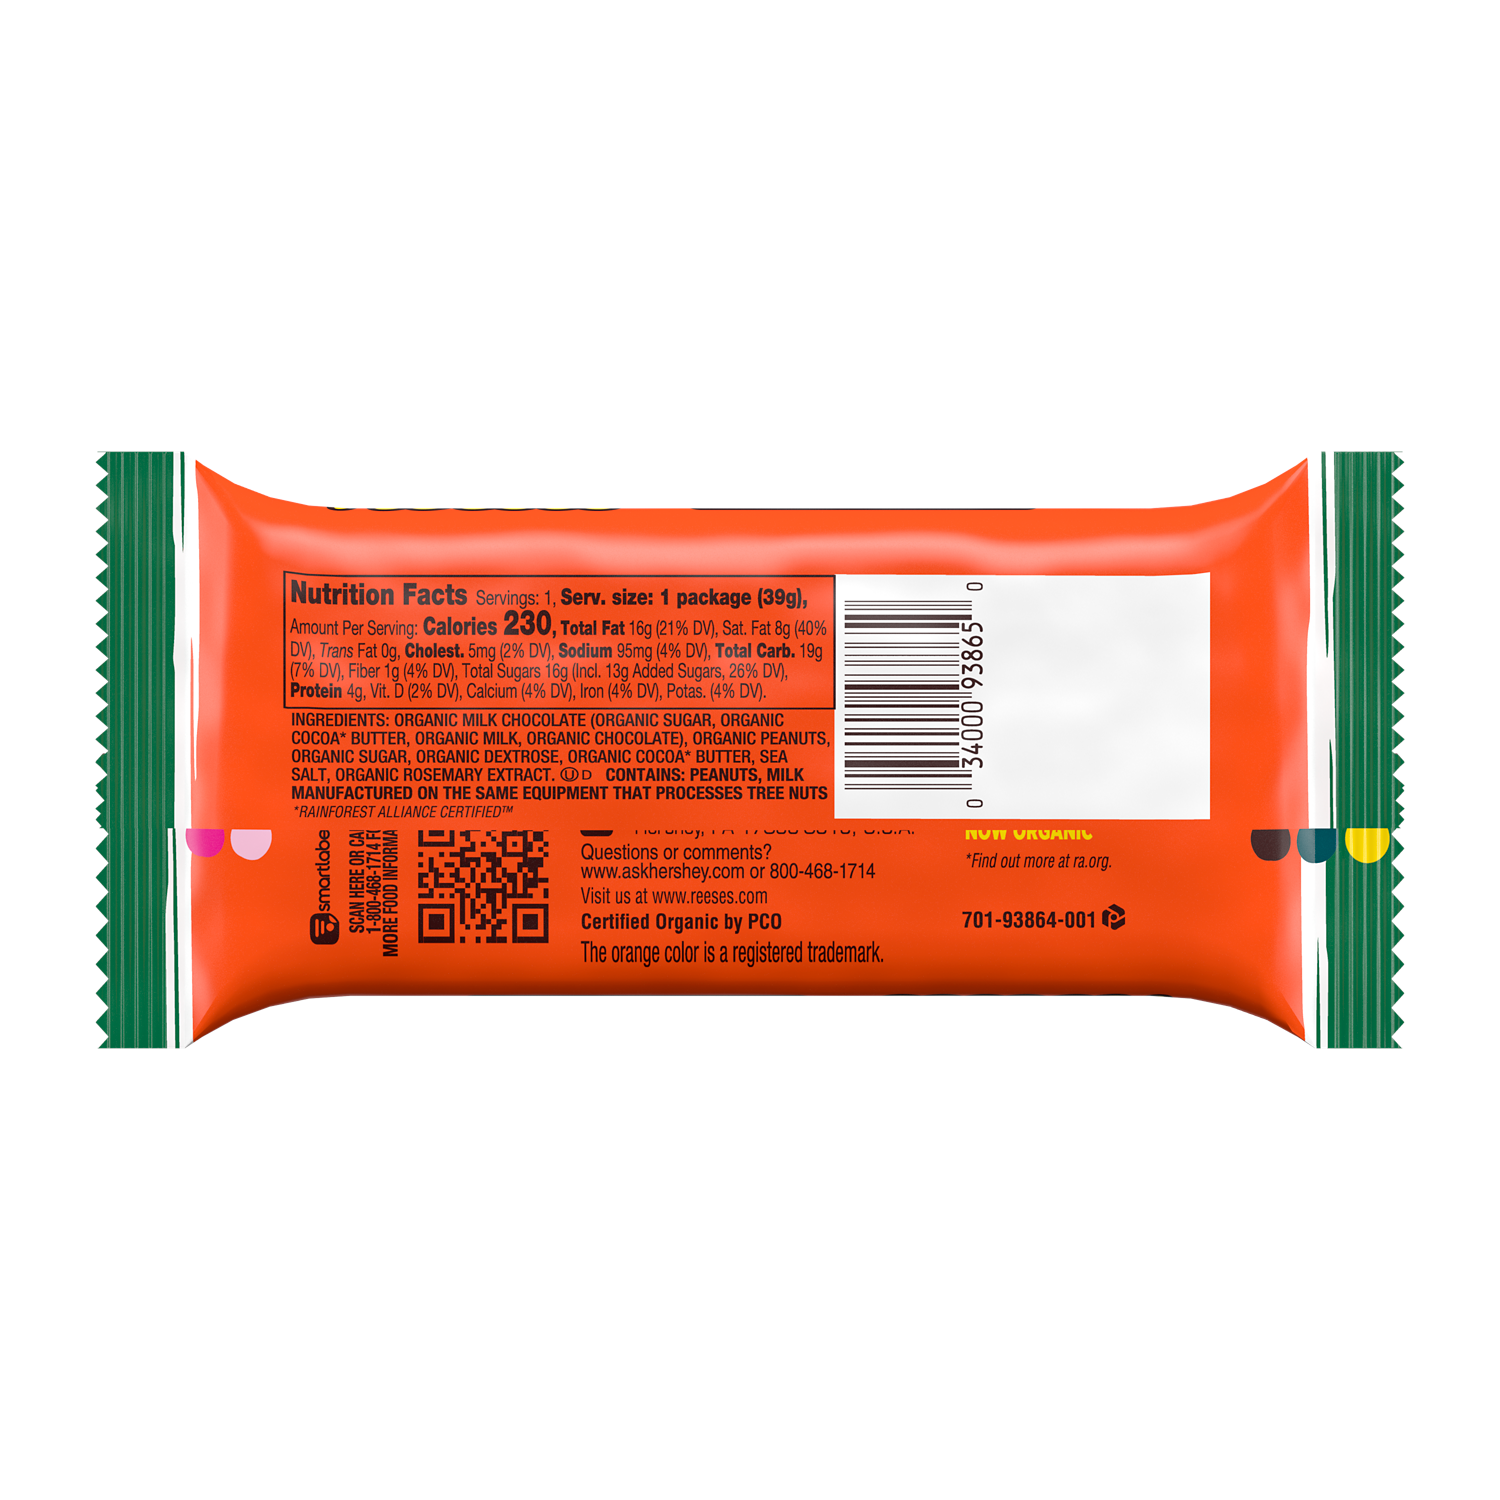 REESE'S Organic Milk Chocolate Peanut Butter Cups, 1.4 oz - Back of Package